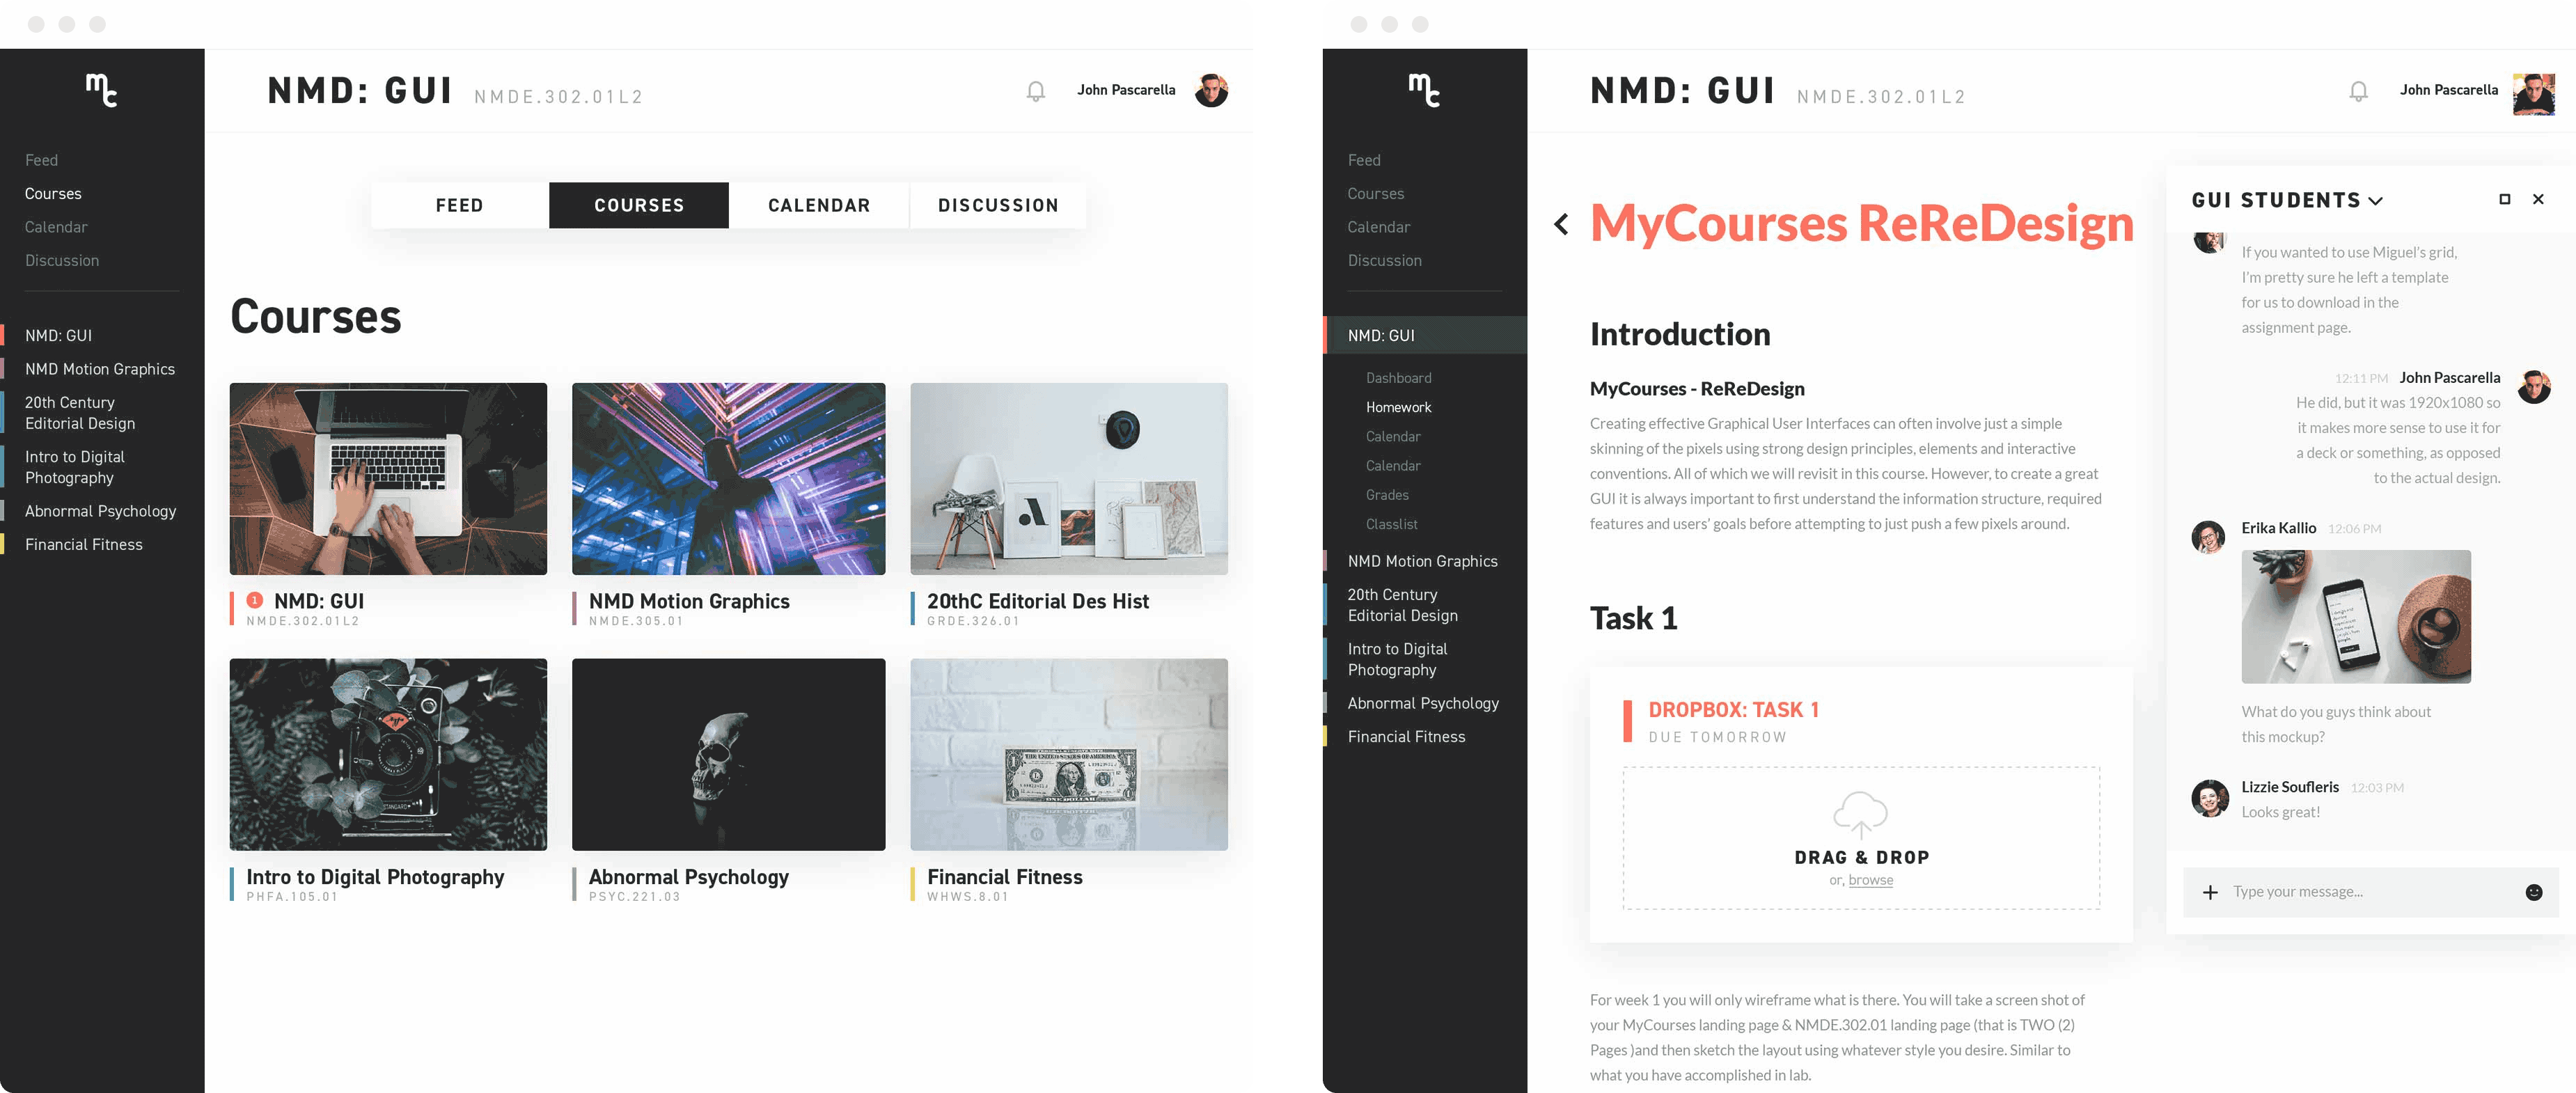 Two screenshots showing the course list and assignment page.